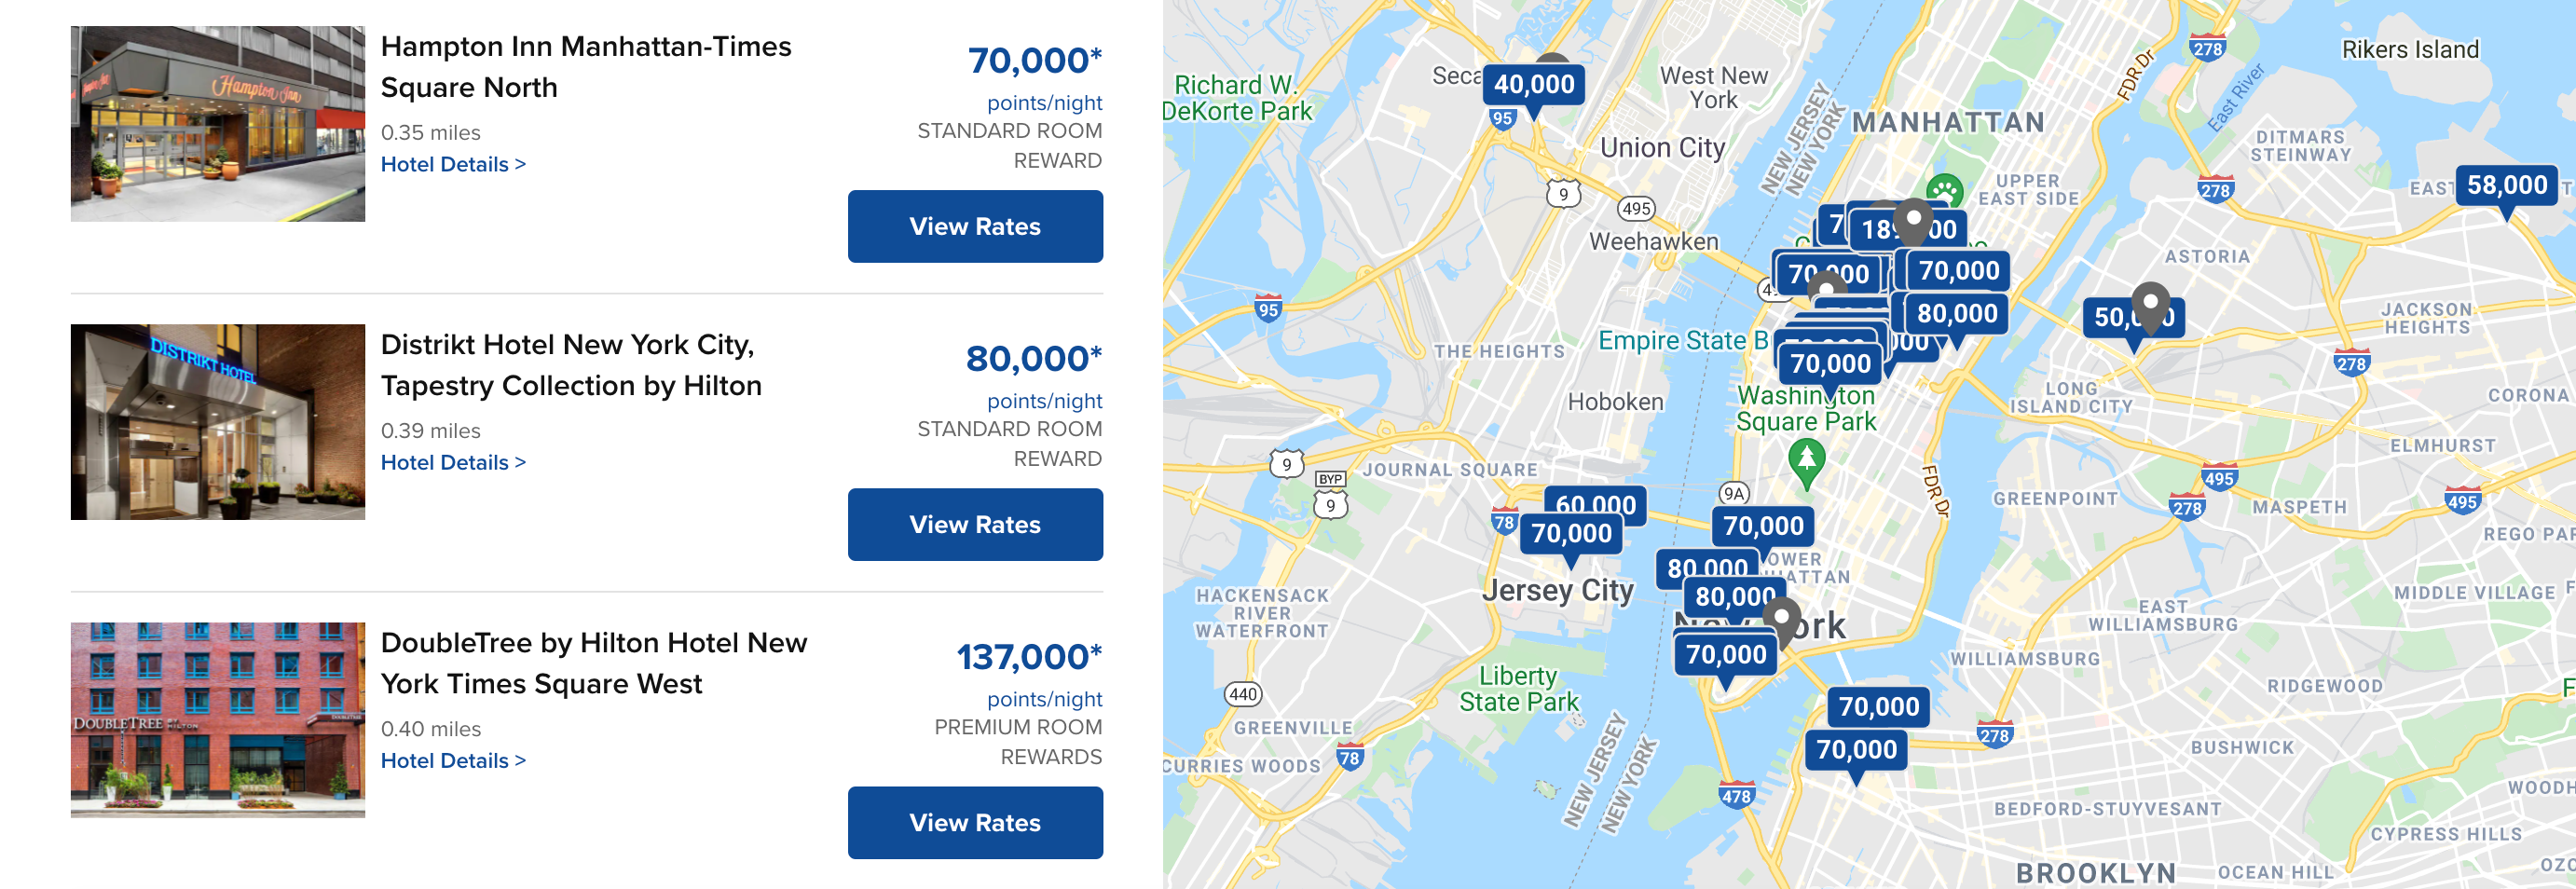 Search results with Hilton Honors in New York City over New Year's weekend